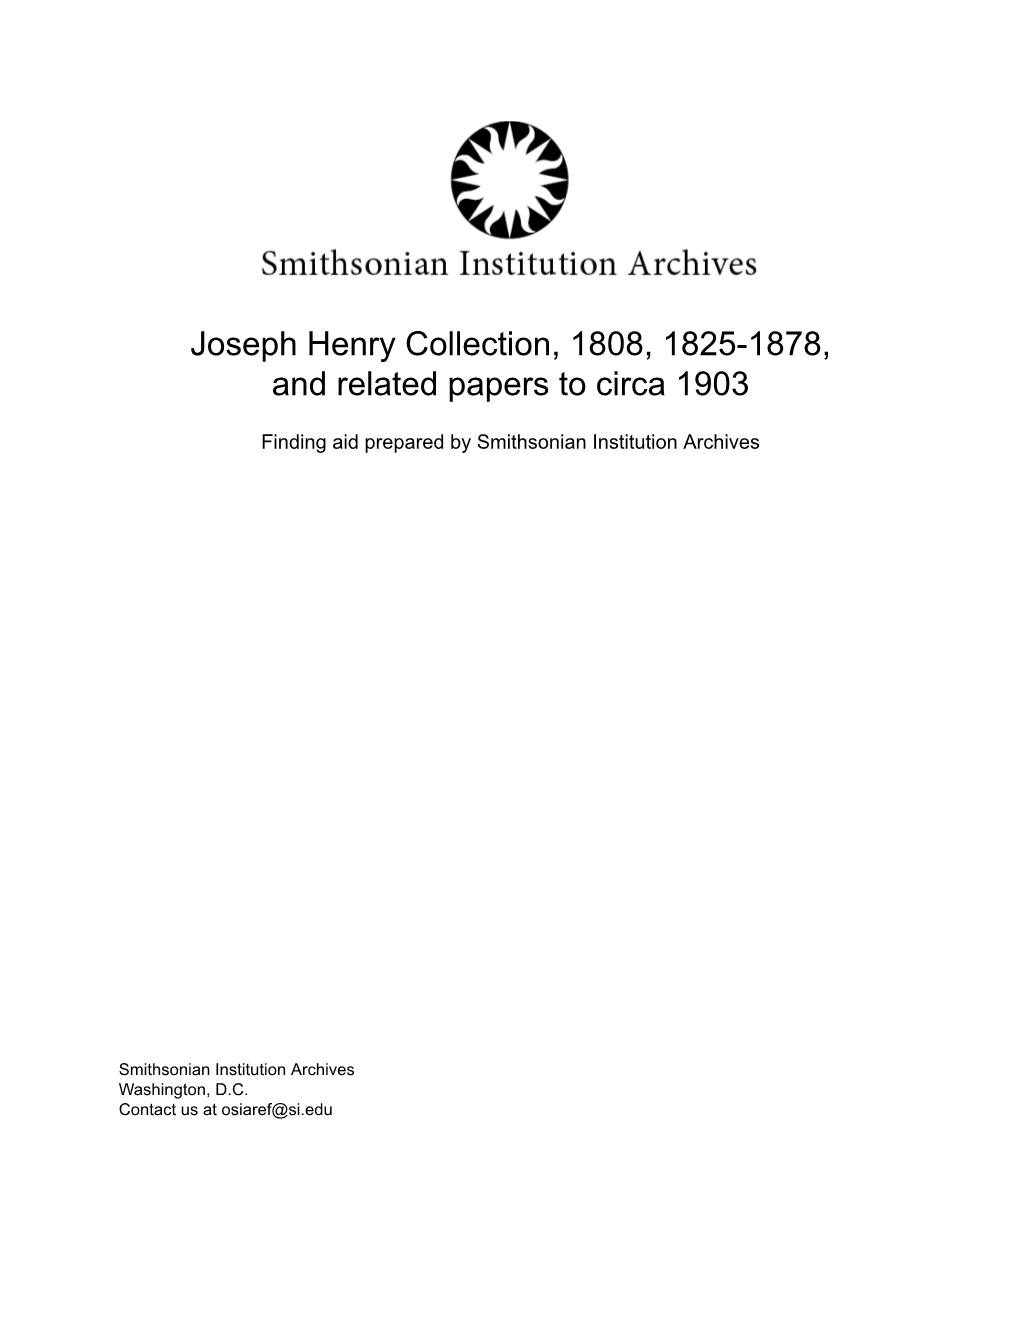 Joseph Henry Collection, 1808, 1825-1878, and Related Papers to Circa 1903